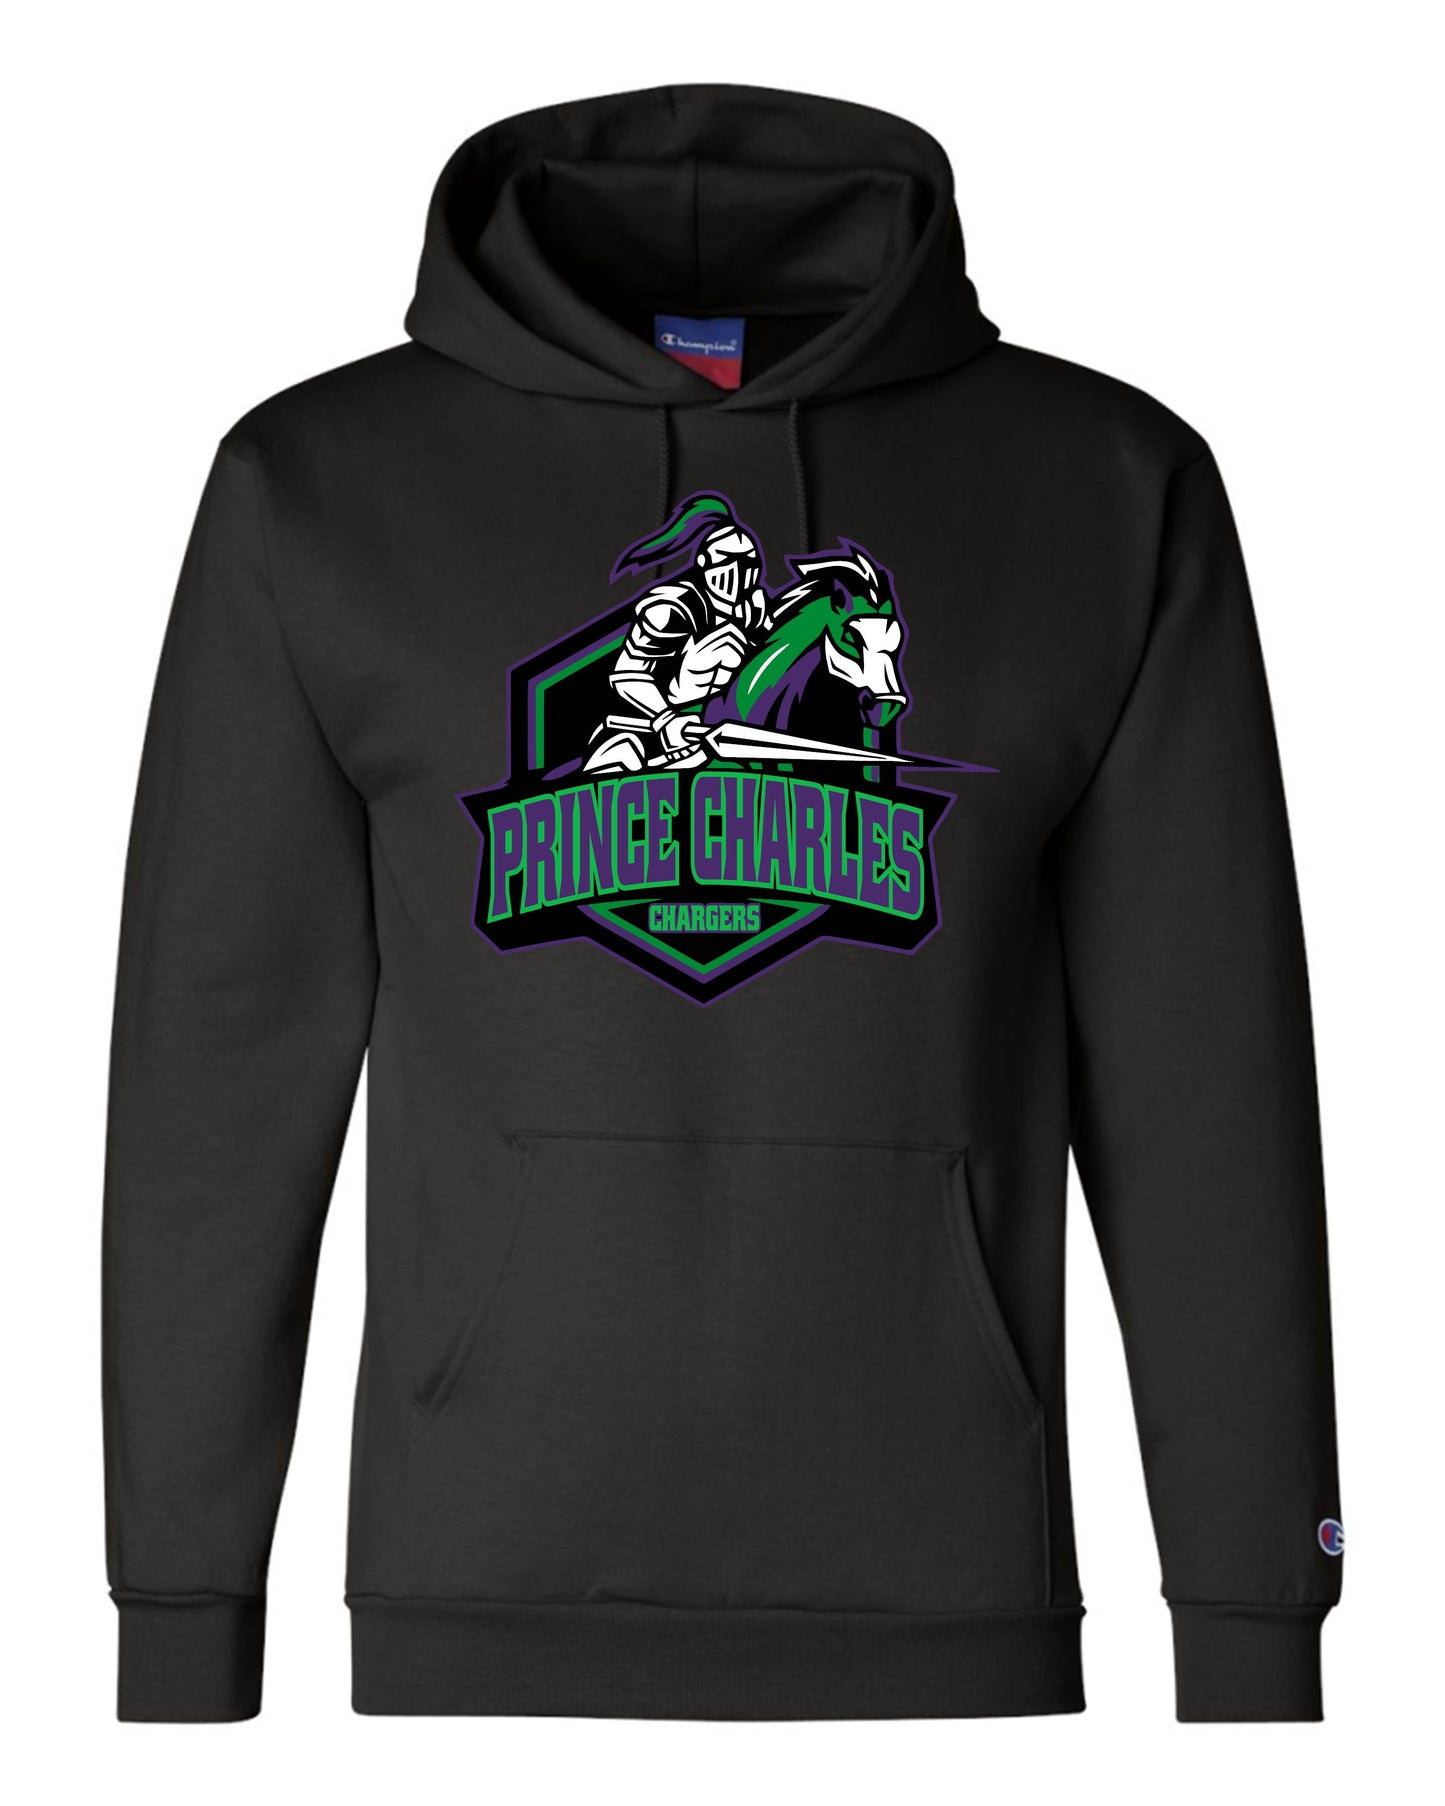 Prince Charles Chargers Champion Adult Hoodie